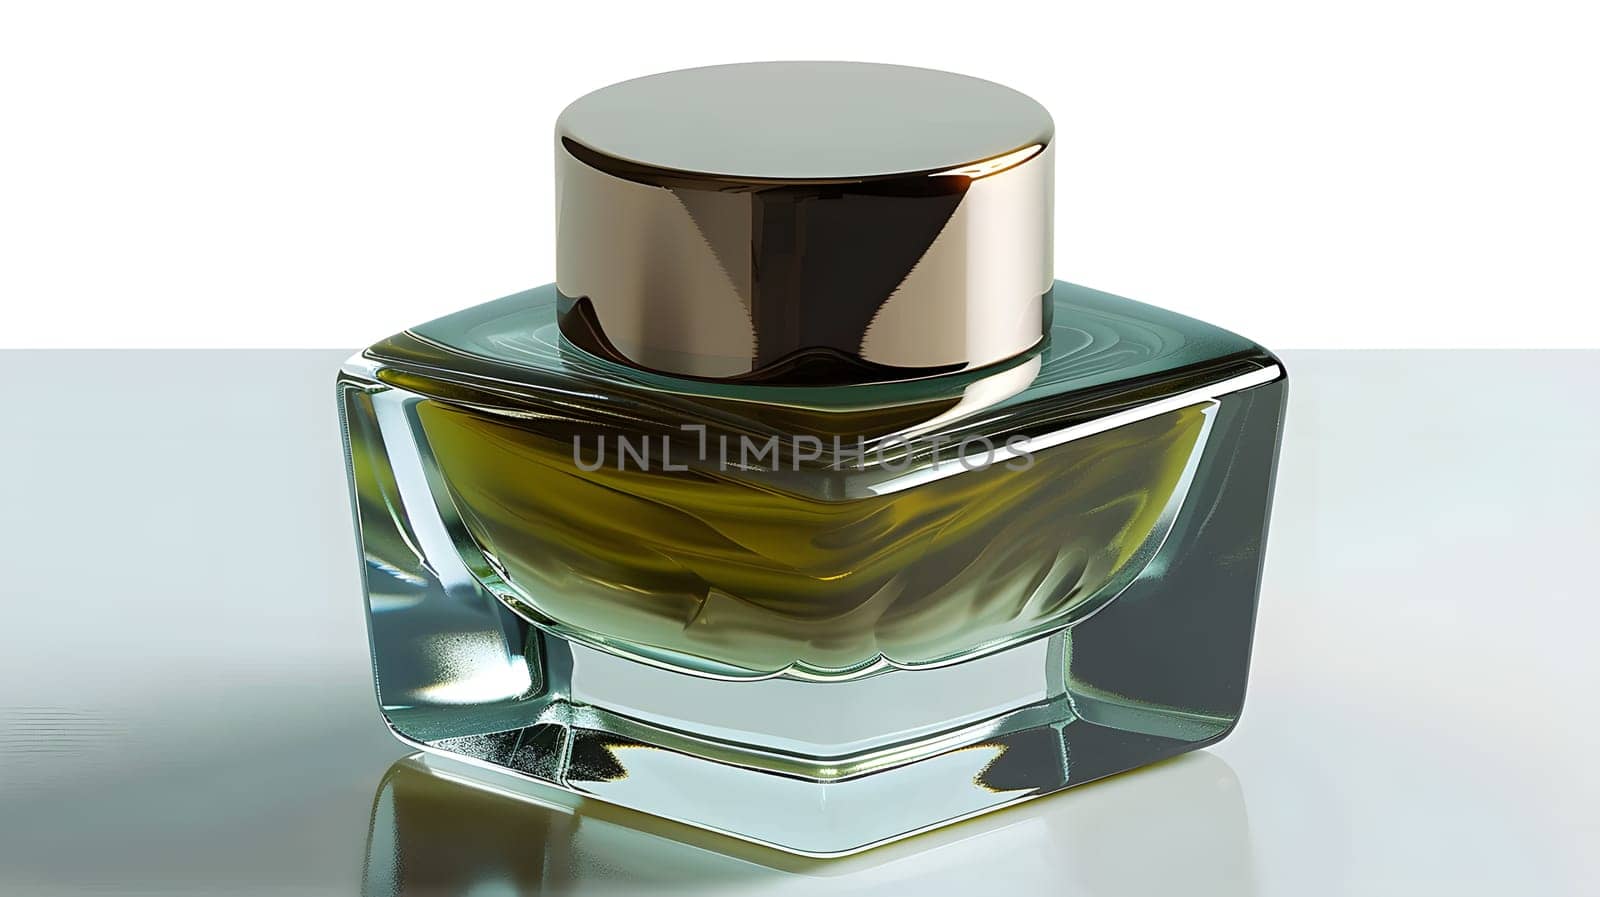 A fluid, fragrant perfume sits in a small glass bottle on a rectangleshaped table, adding a touch of fashion accessory to the event